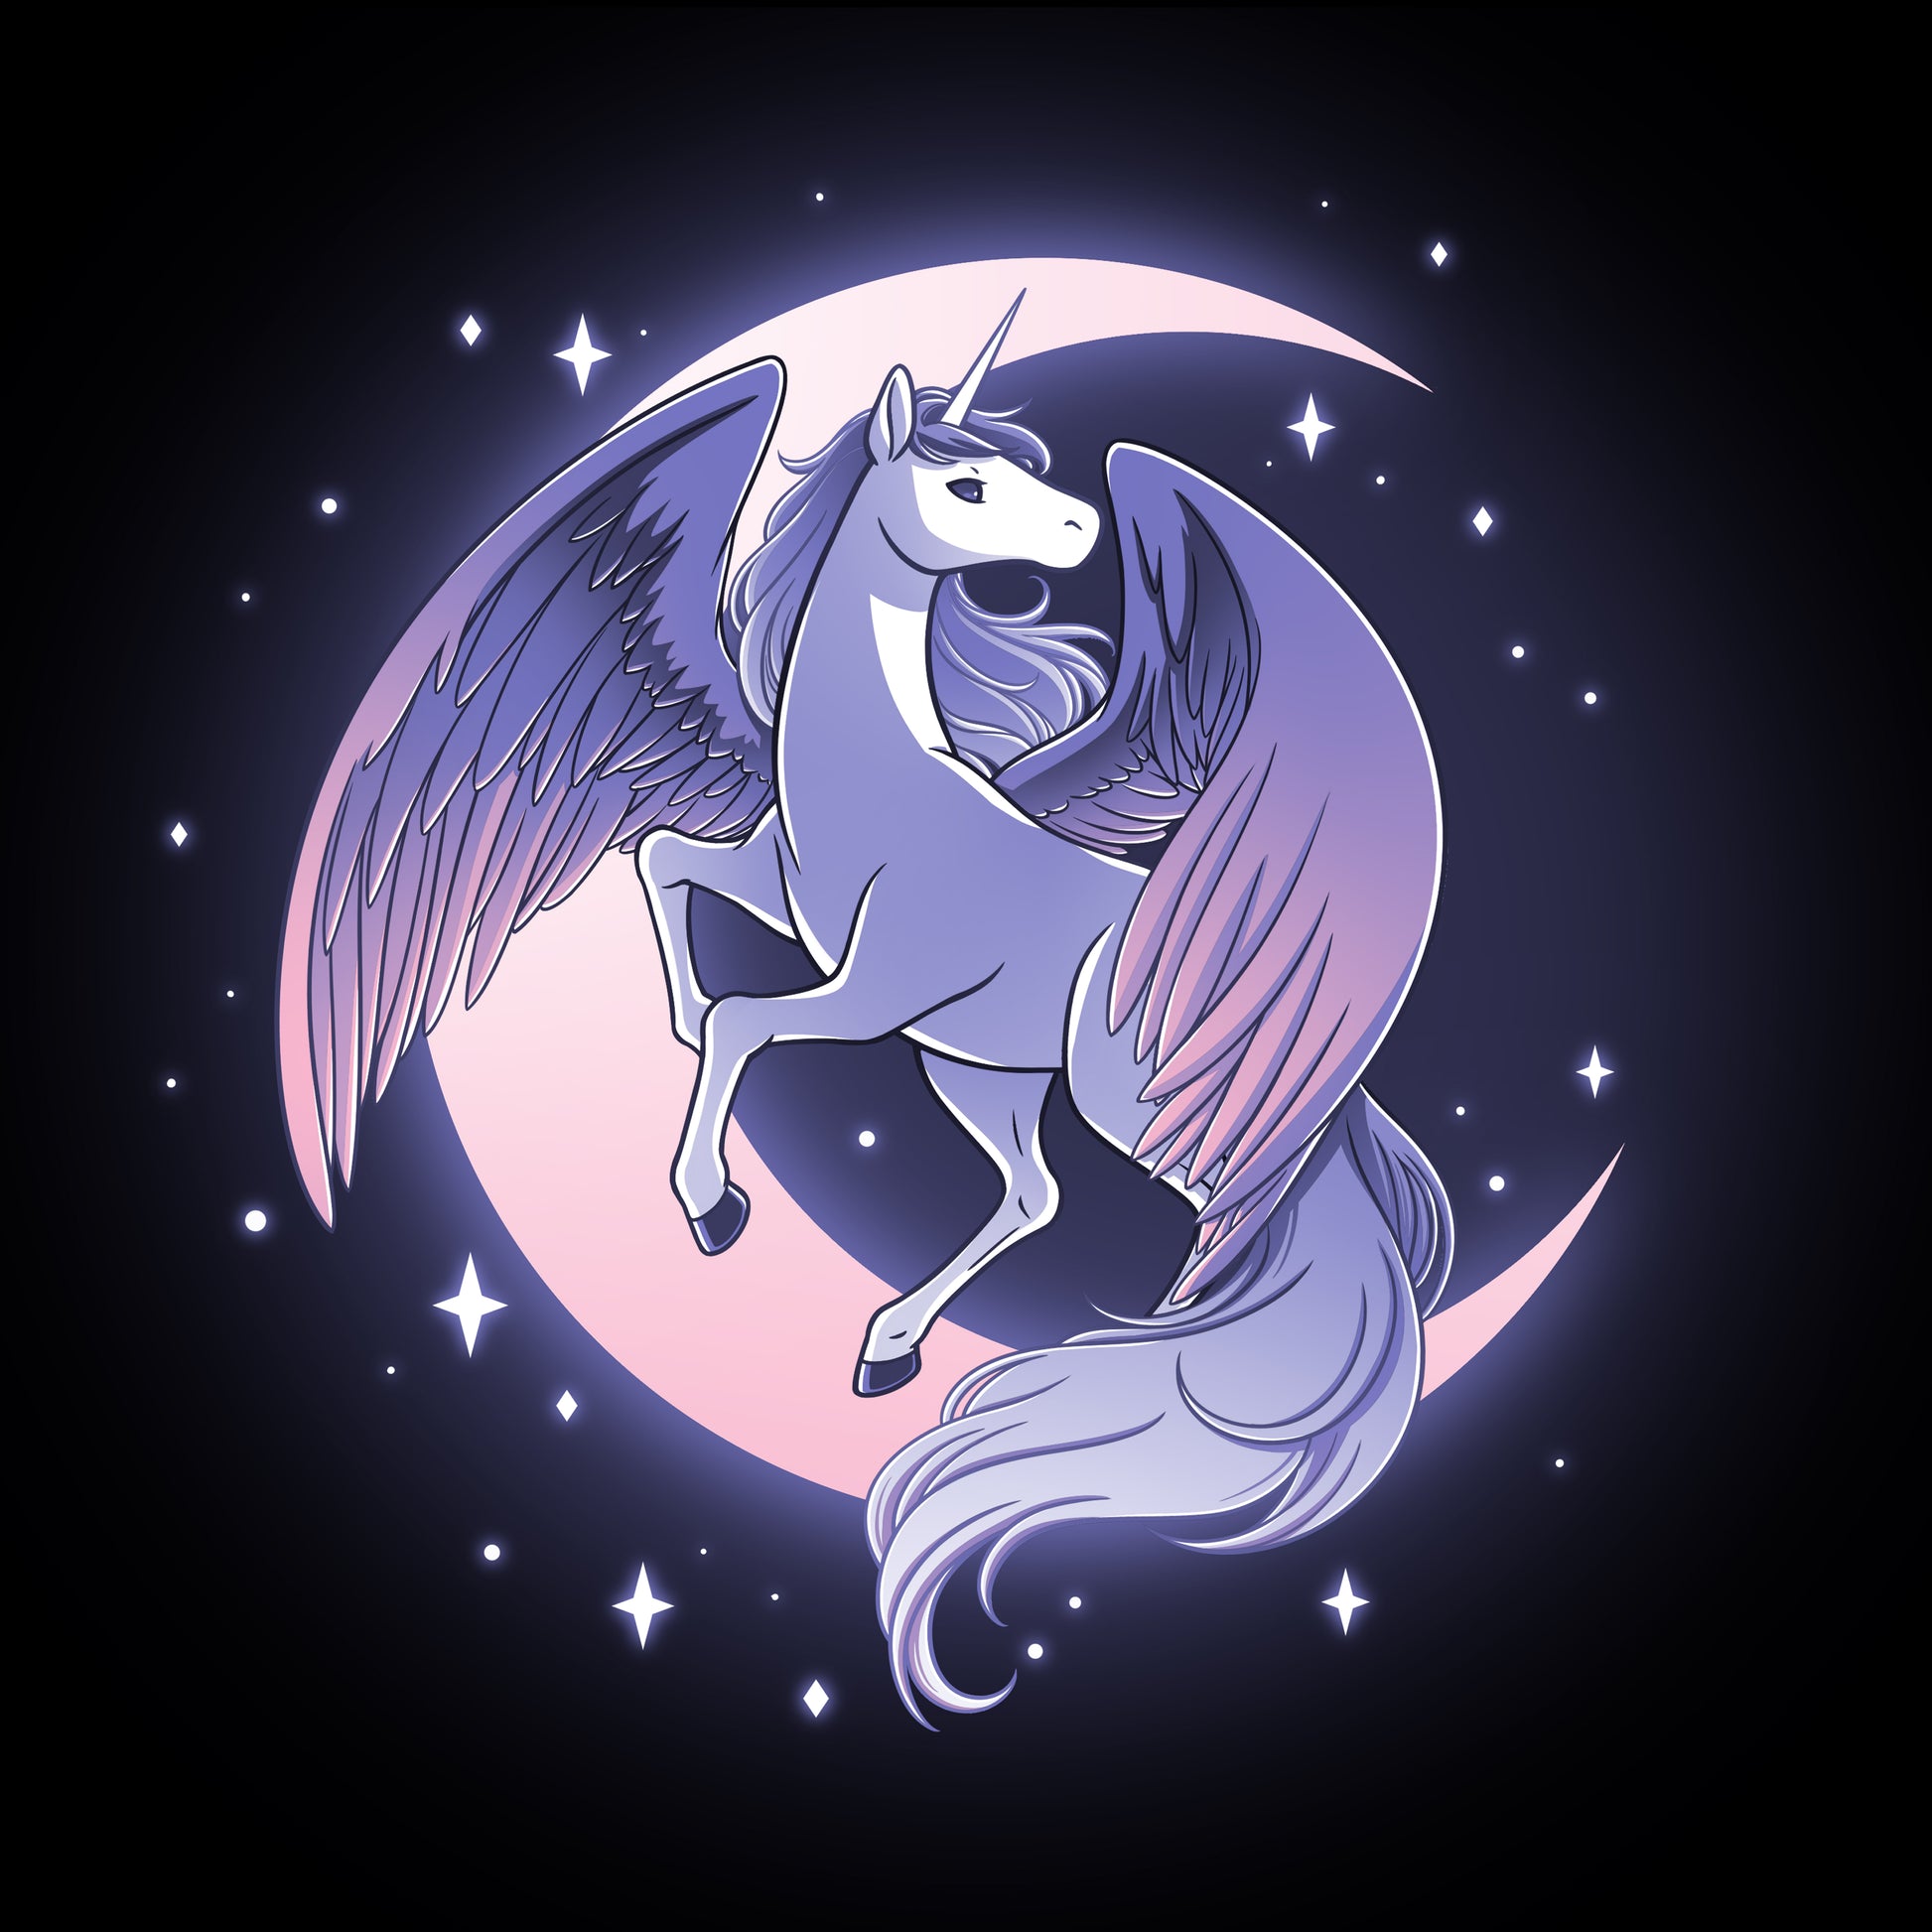 A beautiful Celestial Winged Unicorn gracefully sitting on a crescent, surrounded by twinkling stars in the background. This stunning image would make an eye-catching design for a TeeTurtle T-shirt.